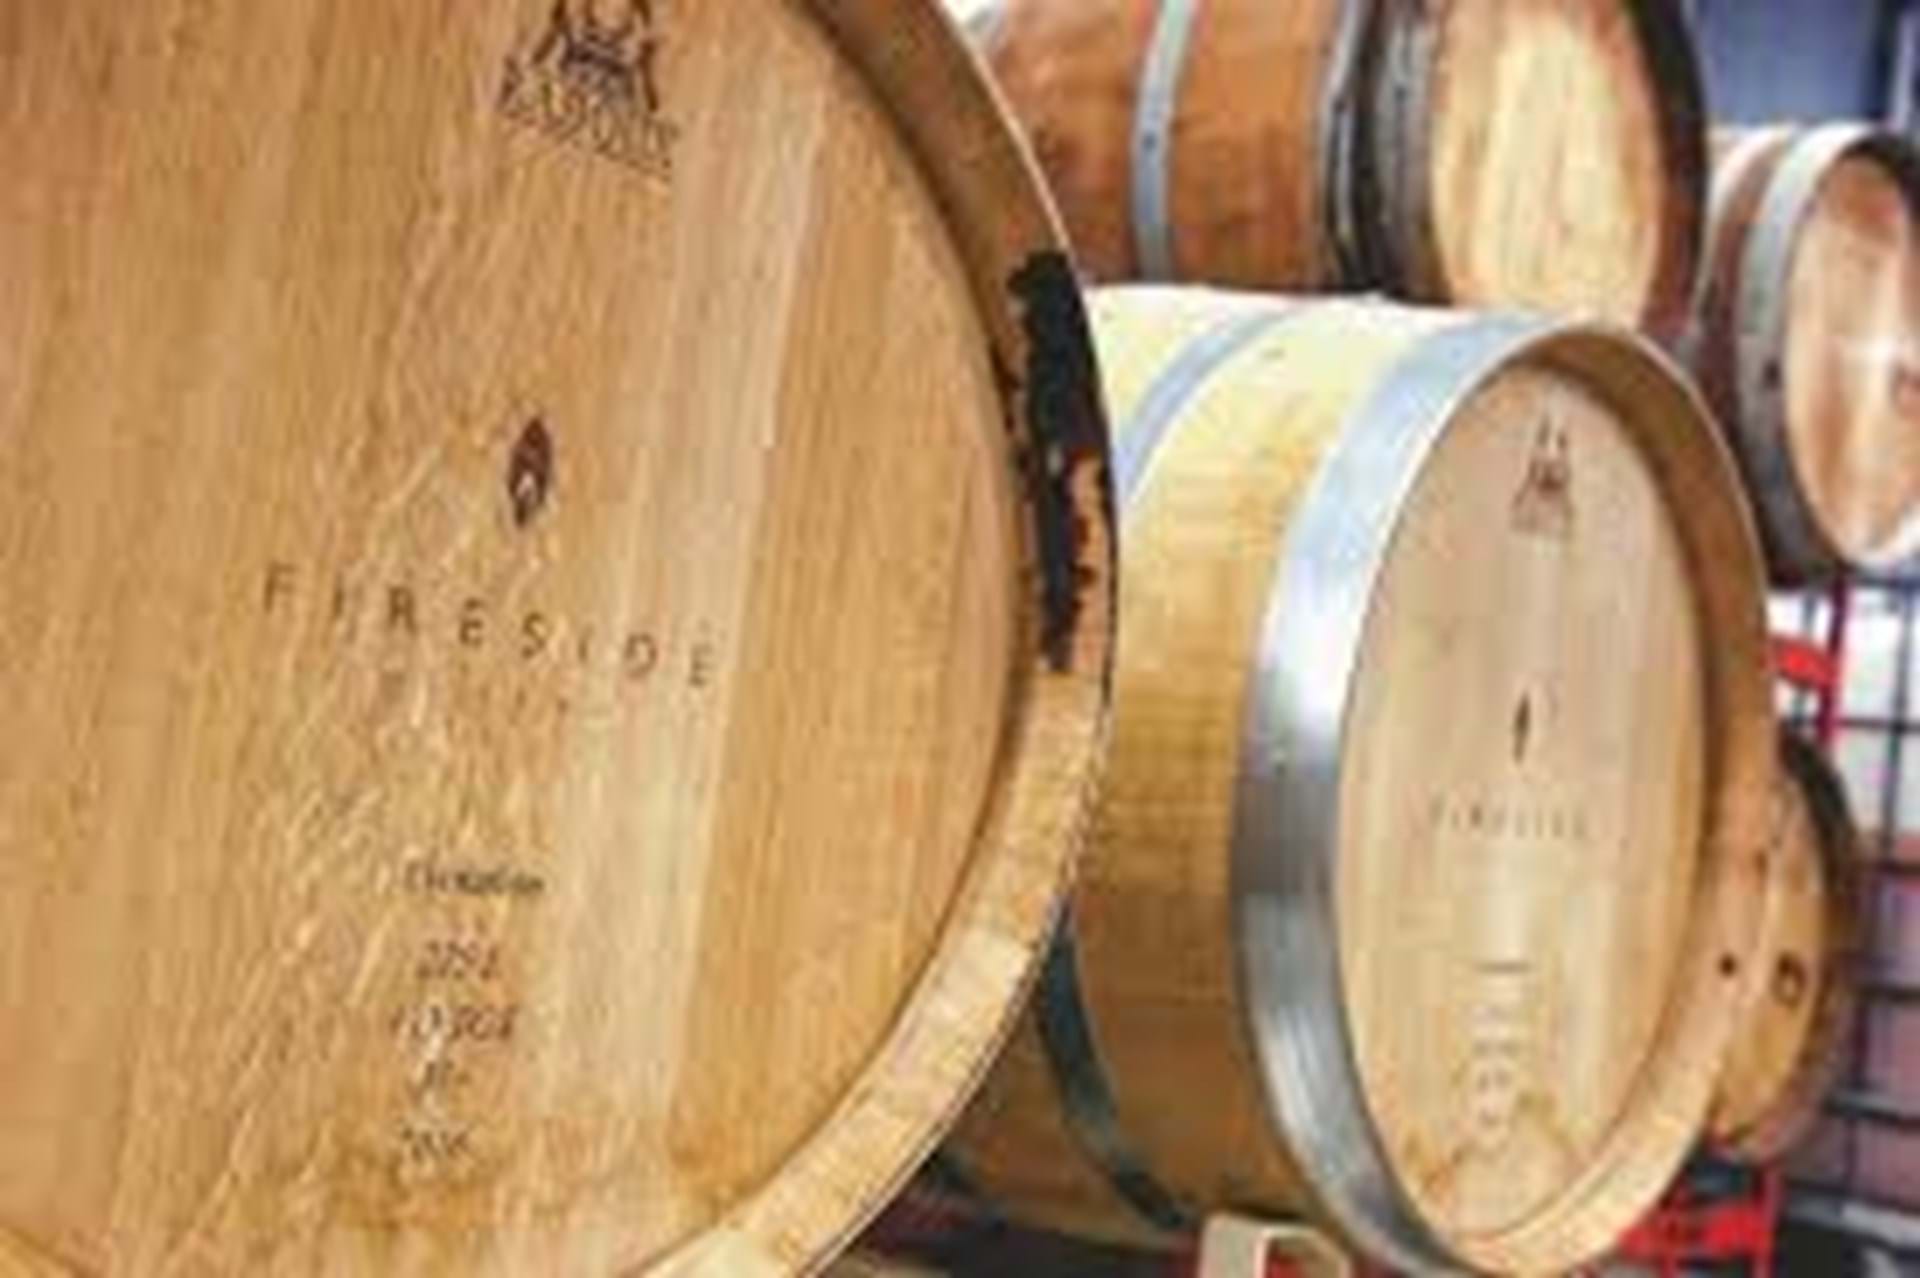 Learn the aging process of our wines!